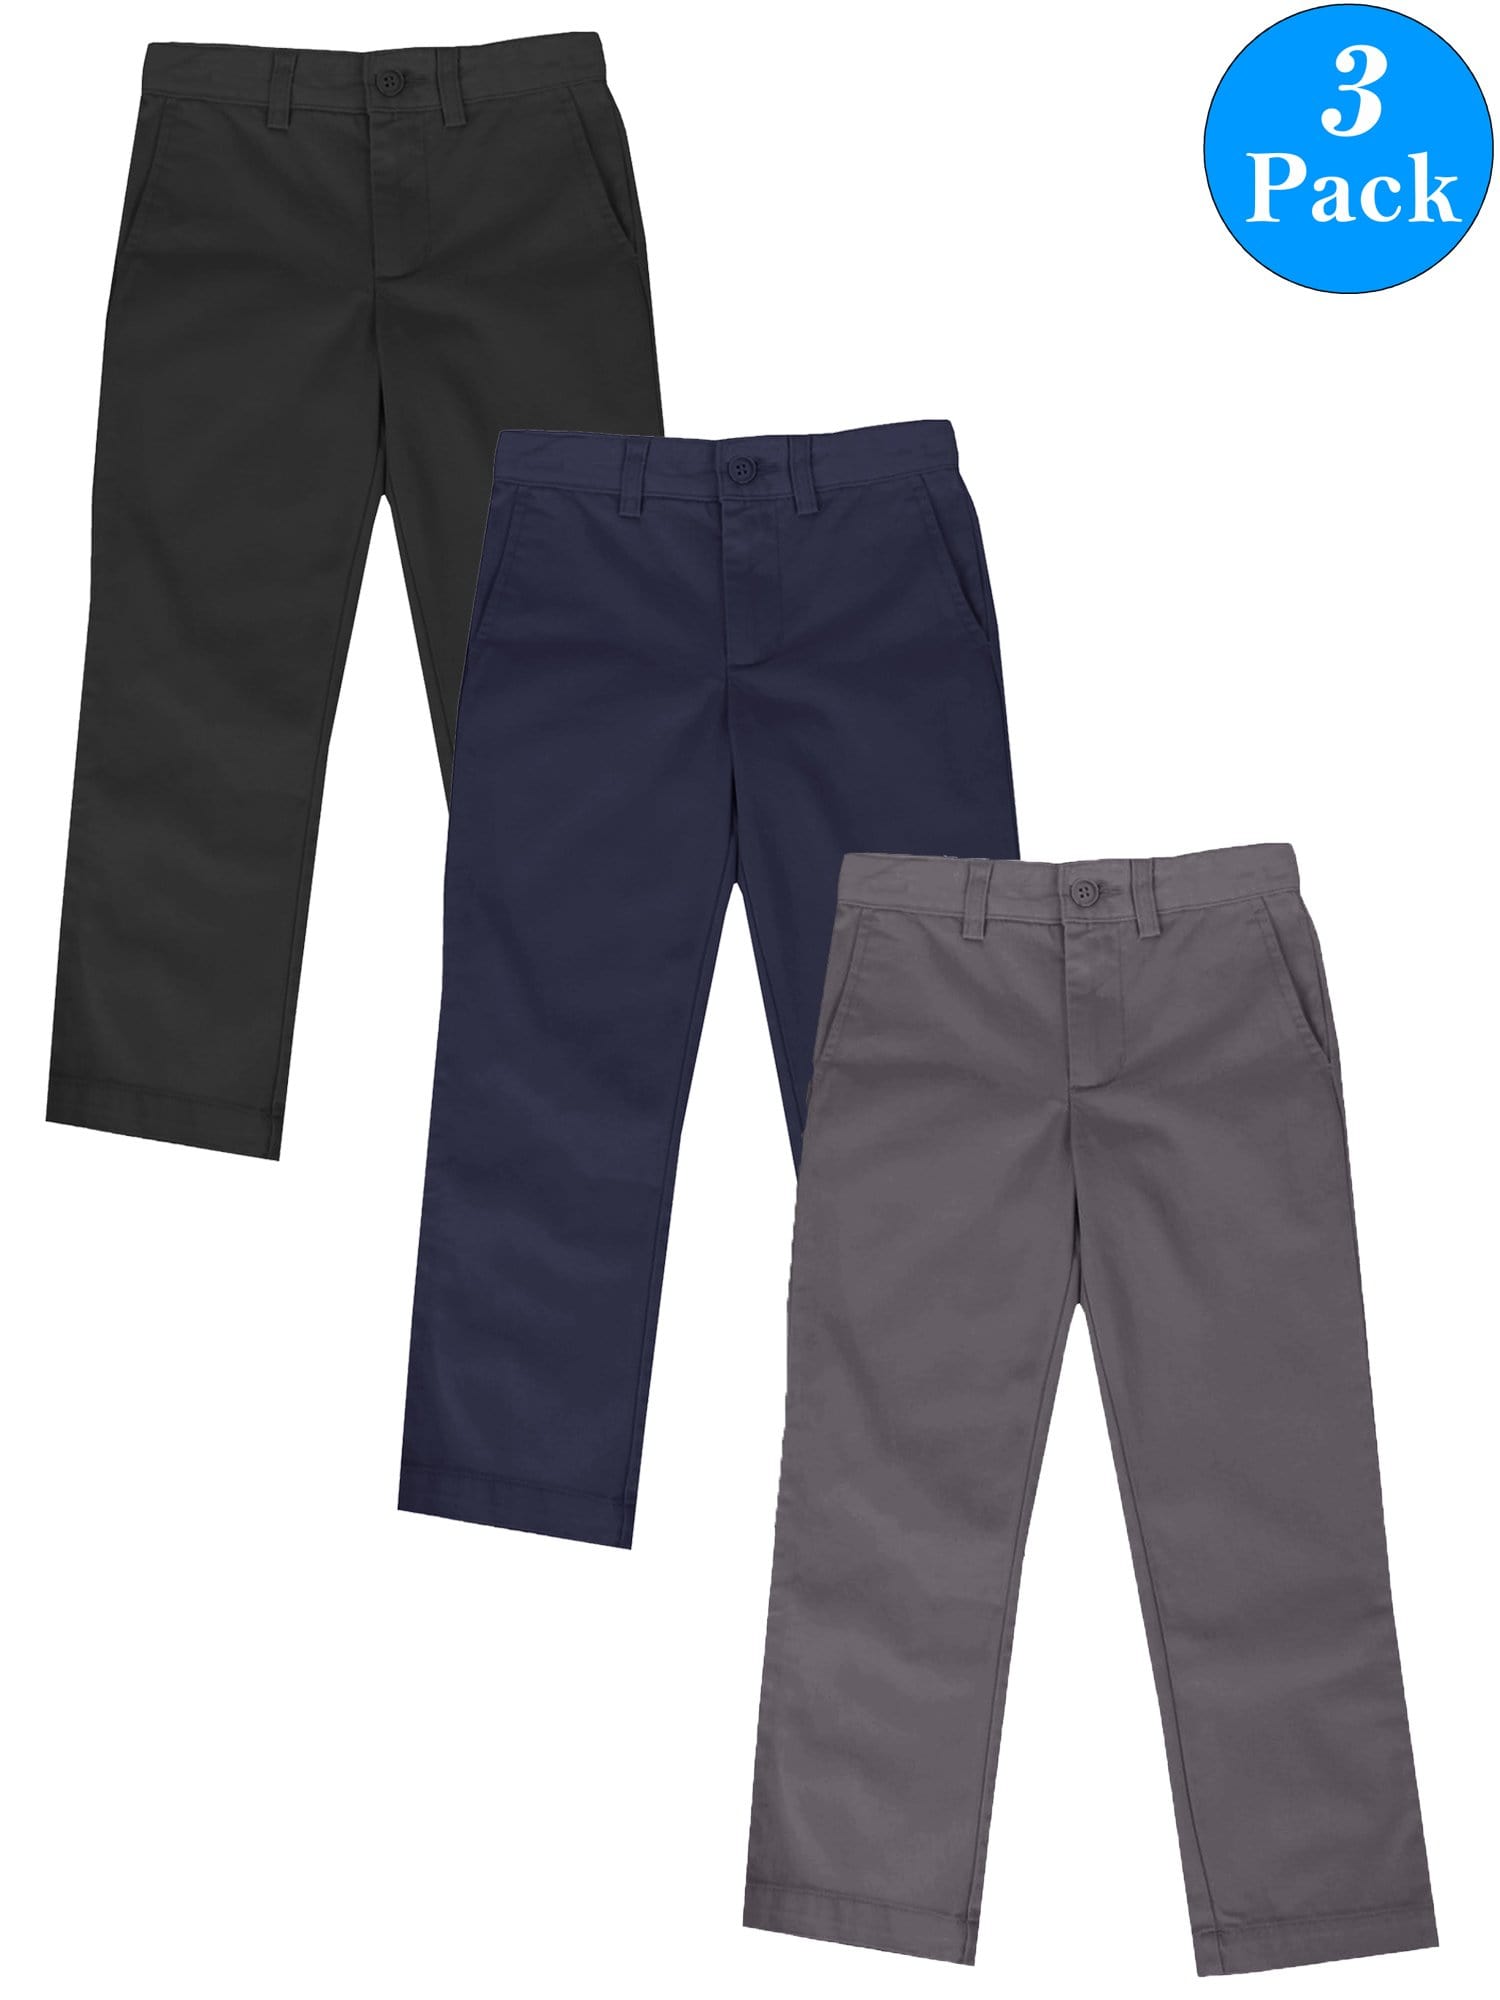 Boys Flat Front School Uniform Pants - Sizes 4-20 (3-PACK) - GalaxybyHarvic